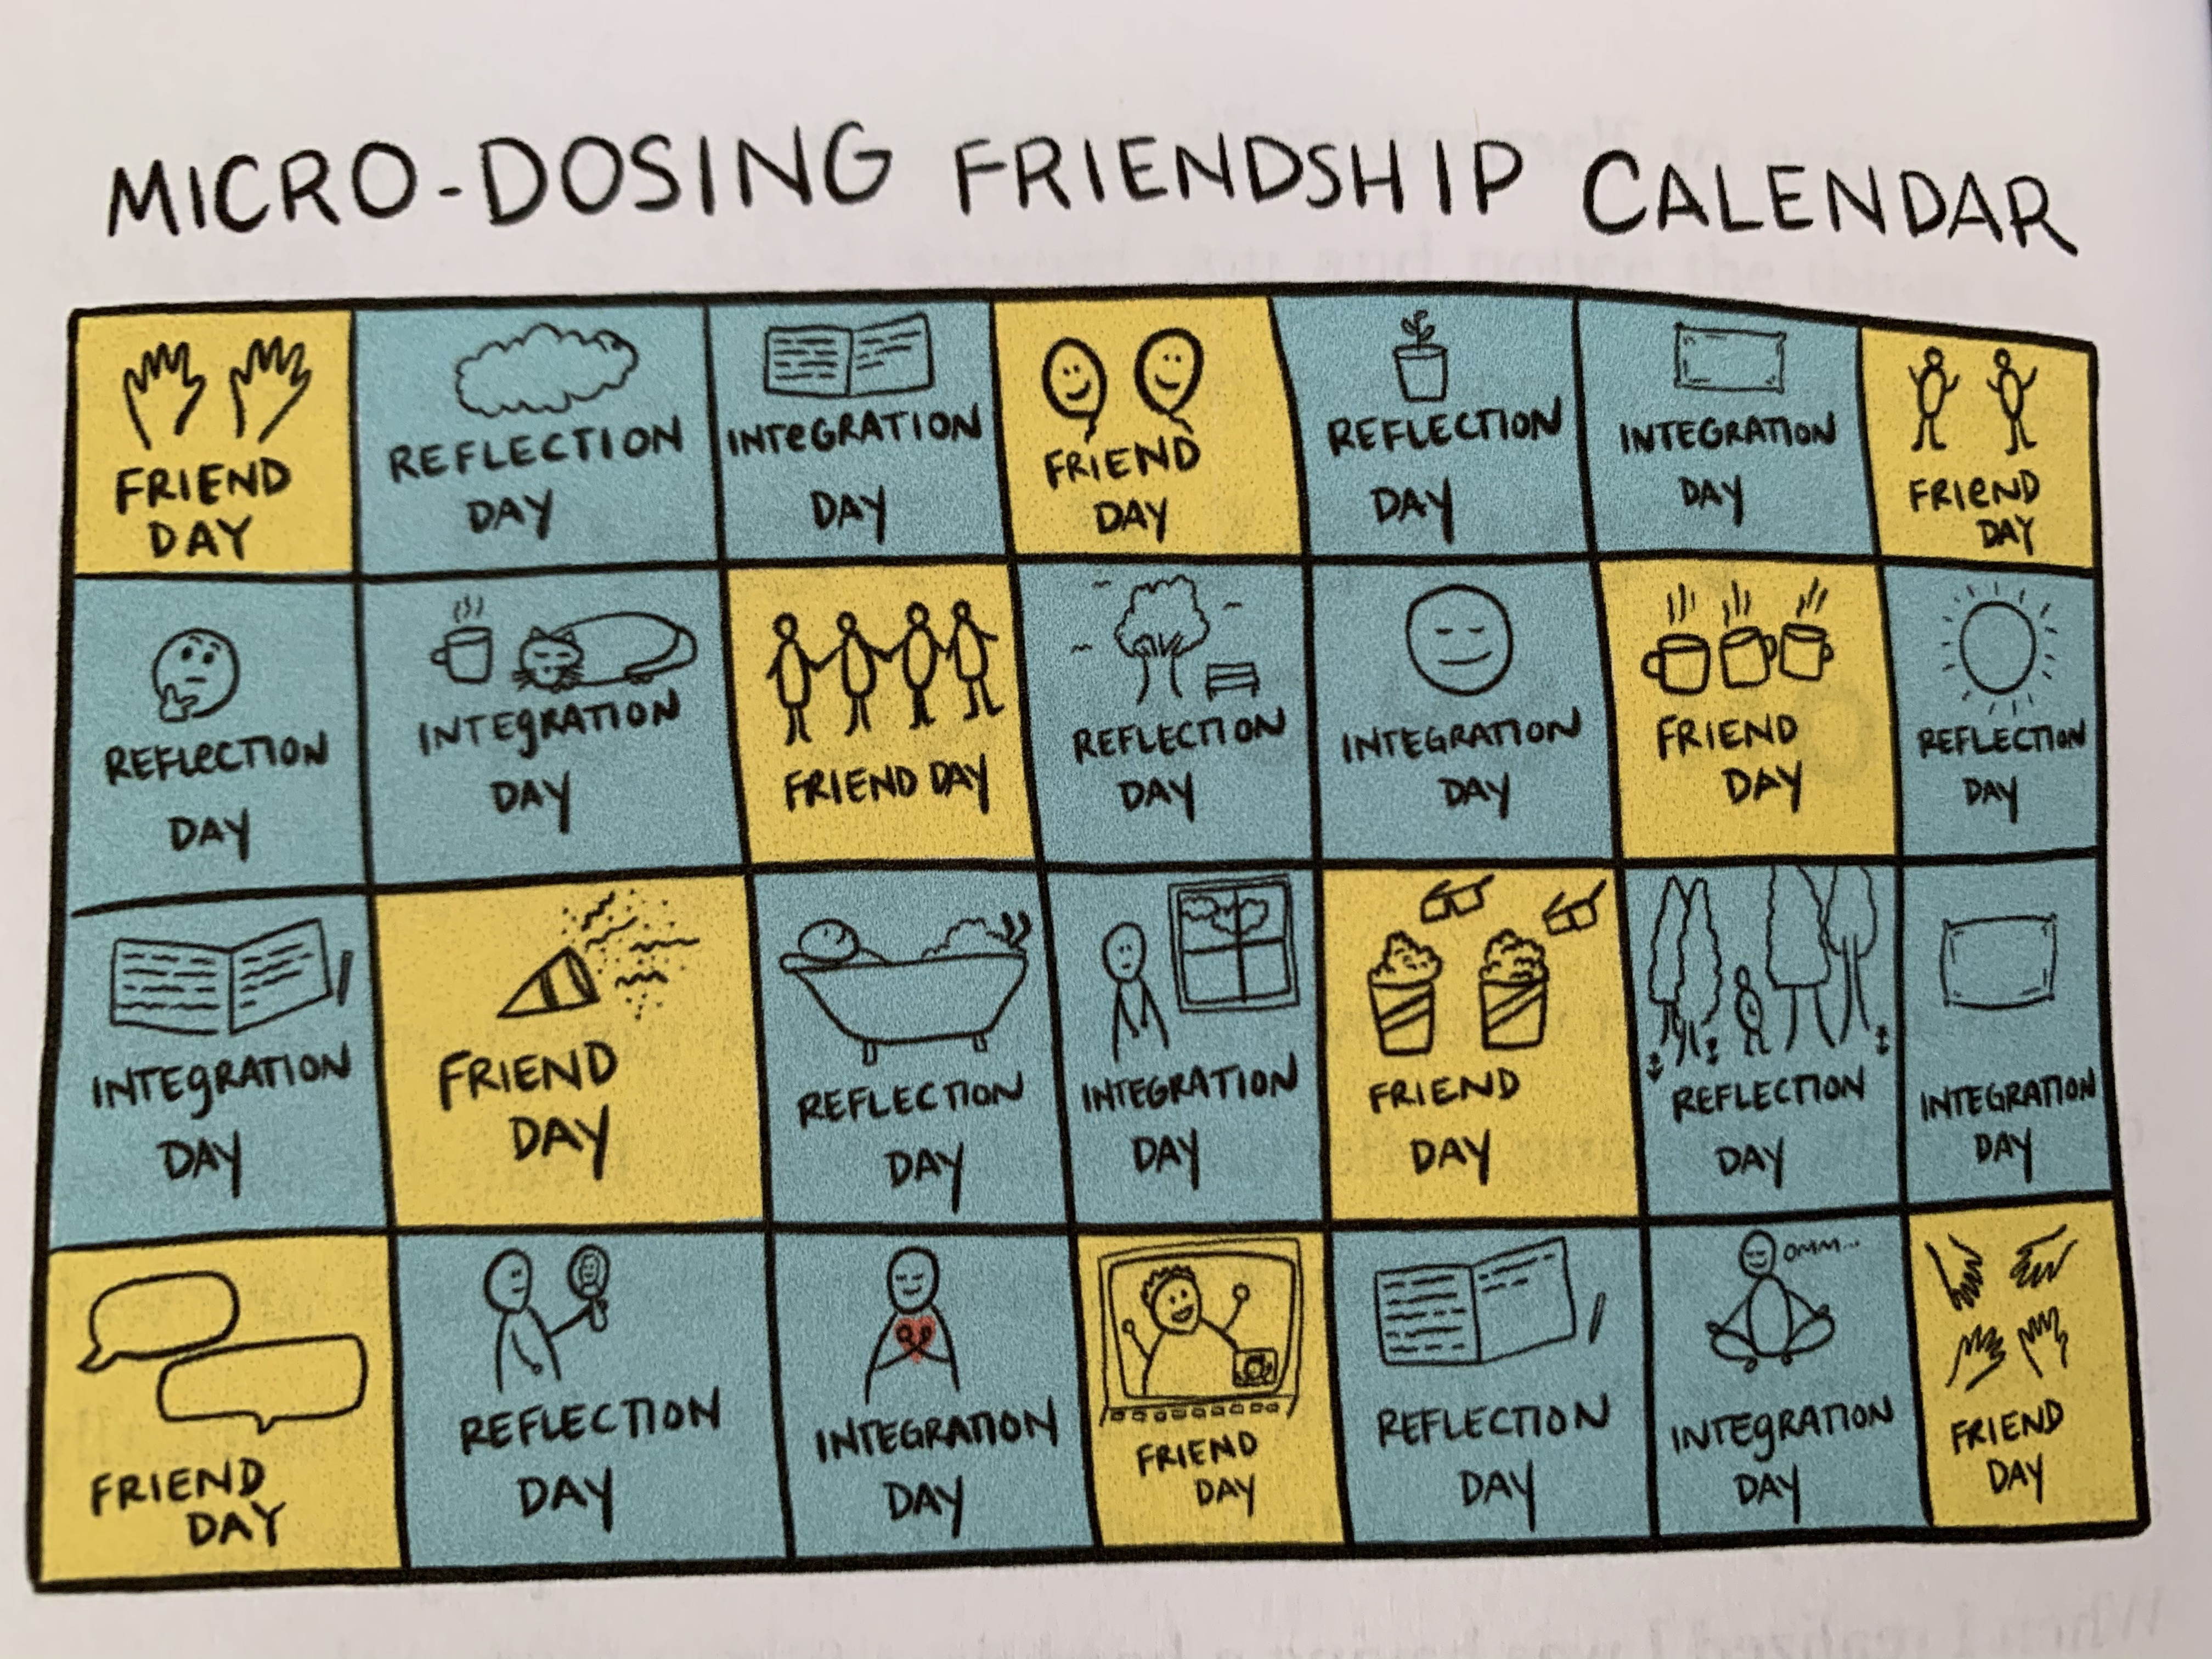 Illustration of a calendar with friendship days